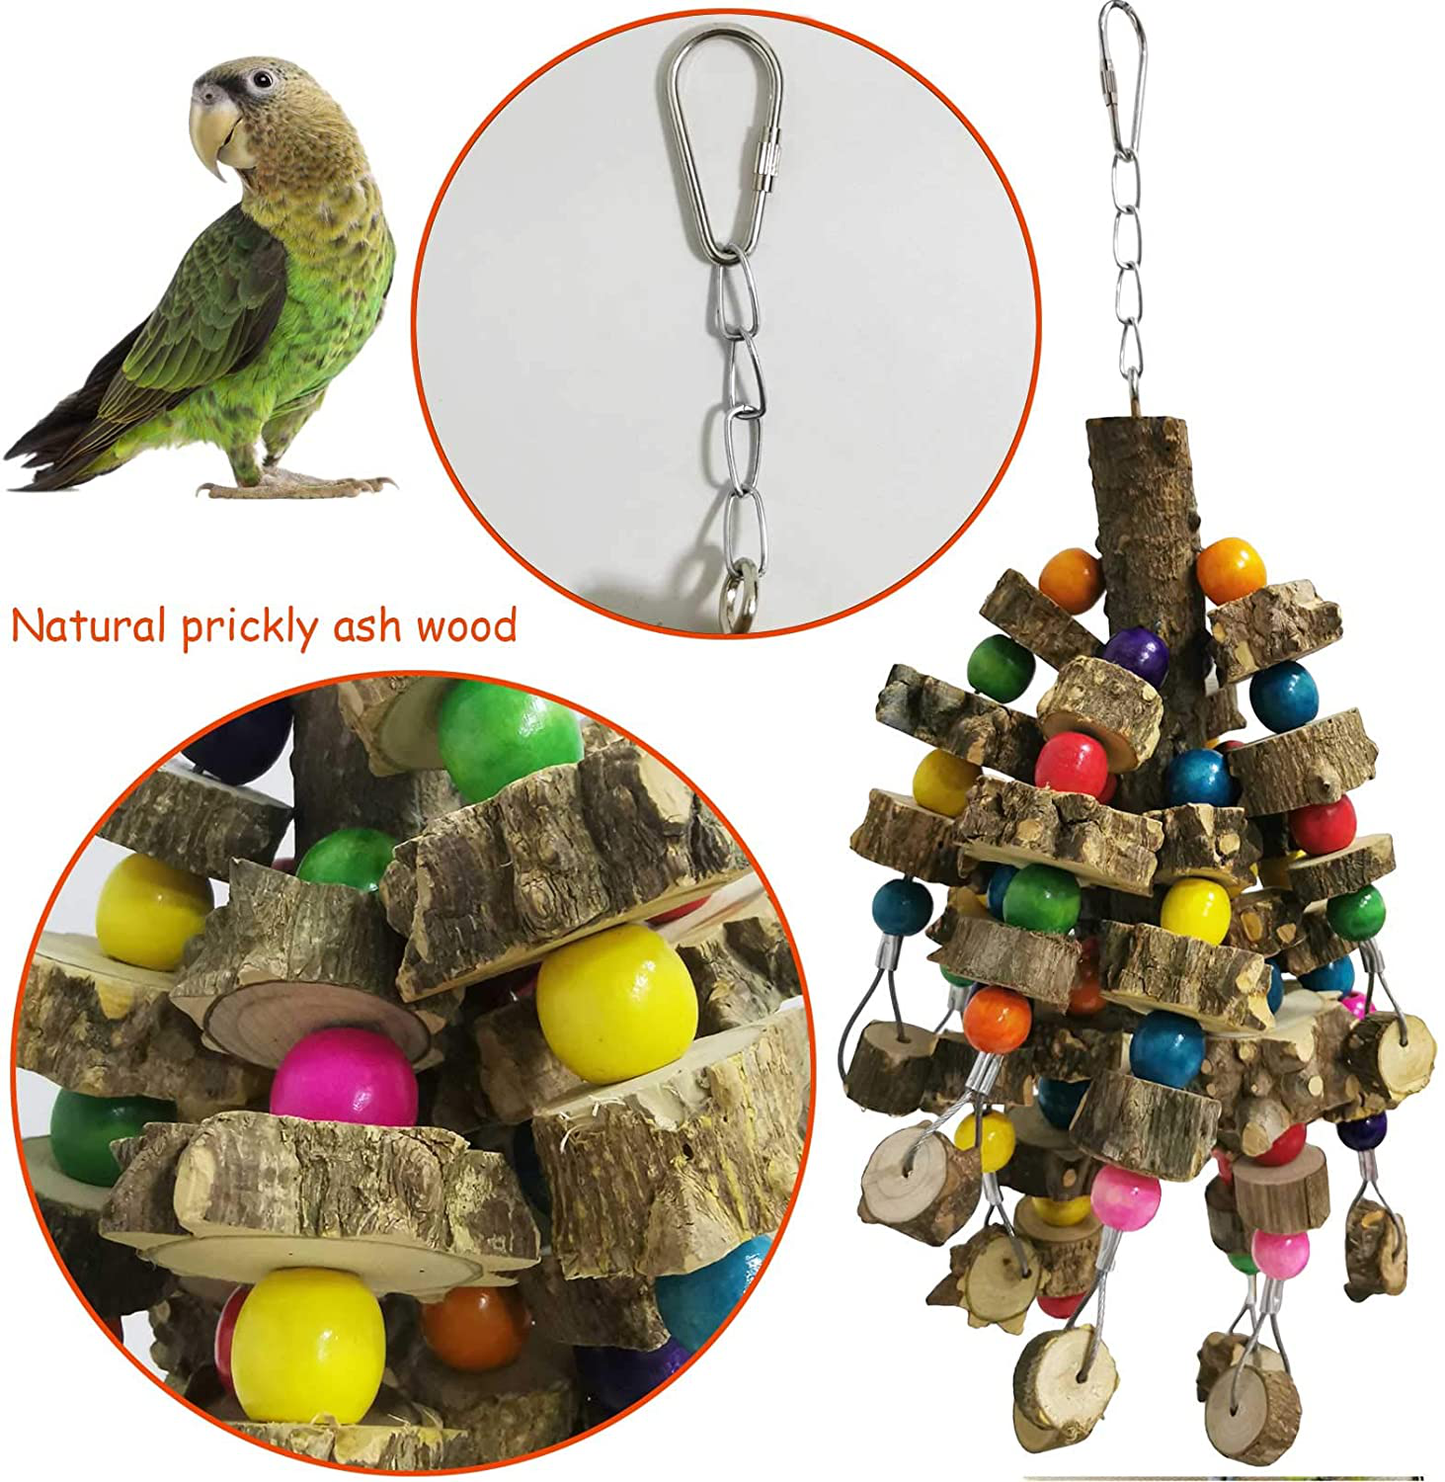 Kathson Natural Parrot Chewing Toys Wood Bird Toy Hanging Parakeet Hammock Cage Accessories Cuttlebone Beak Grinding for Parrots Cockatoos African Grey Cockatiels Conure Eclectus Budgies 2PCS